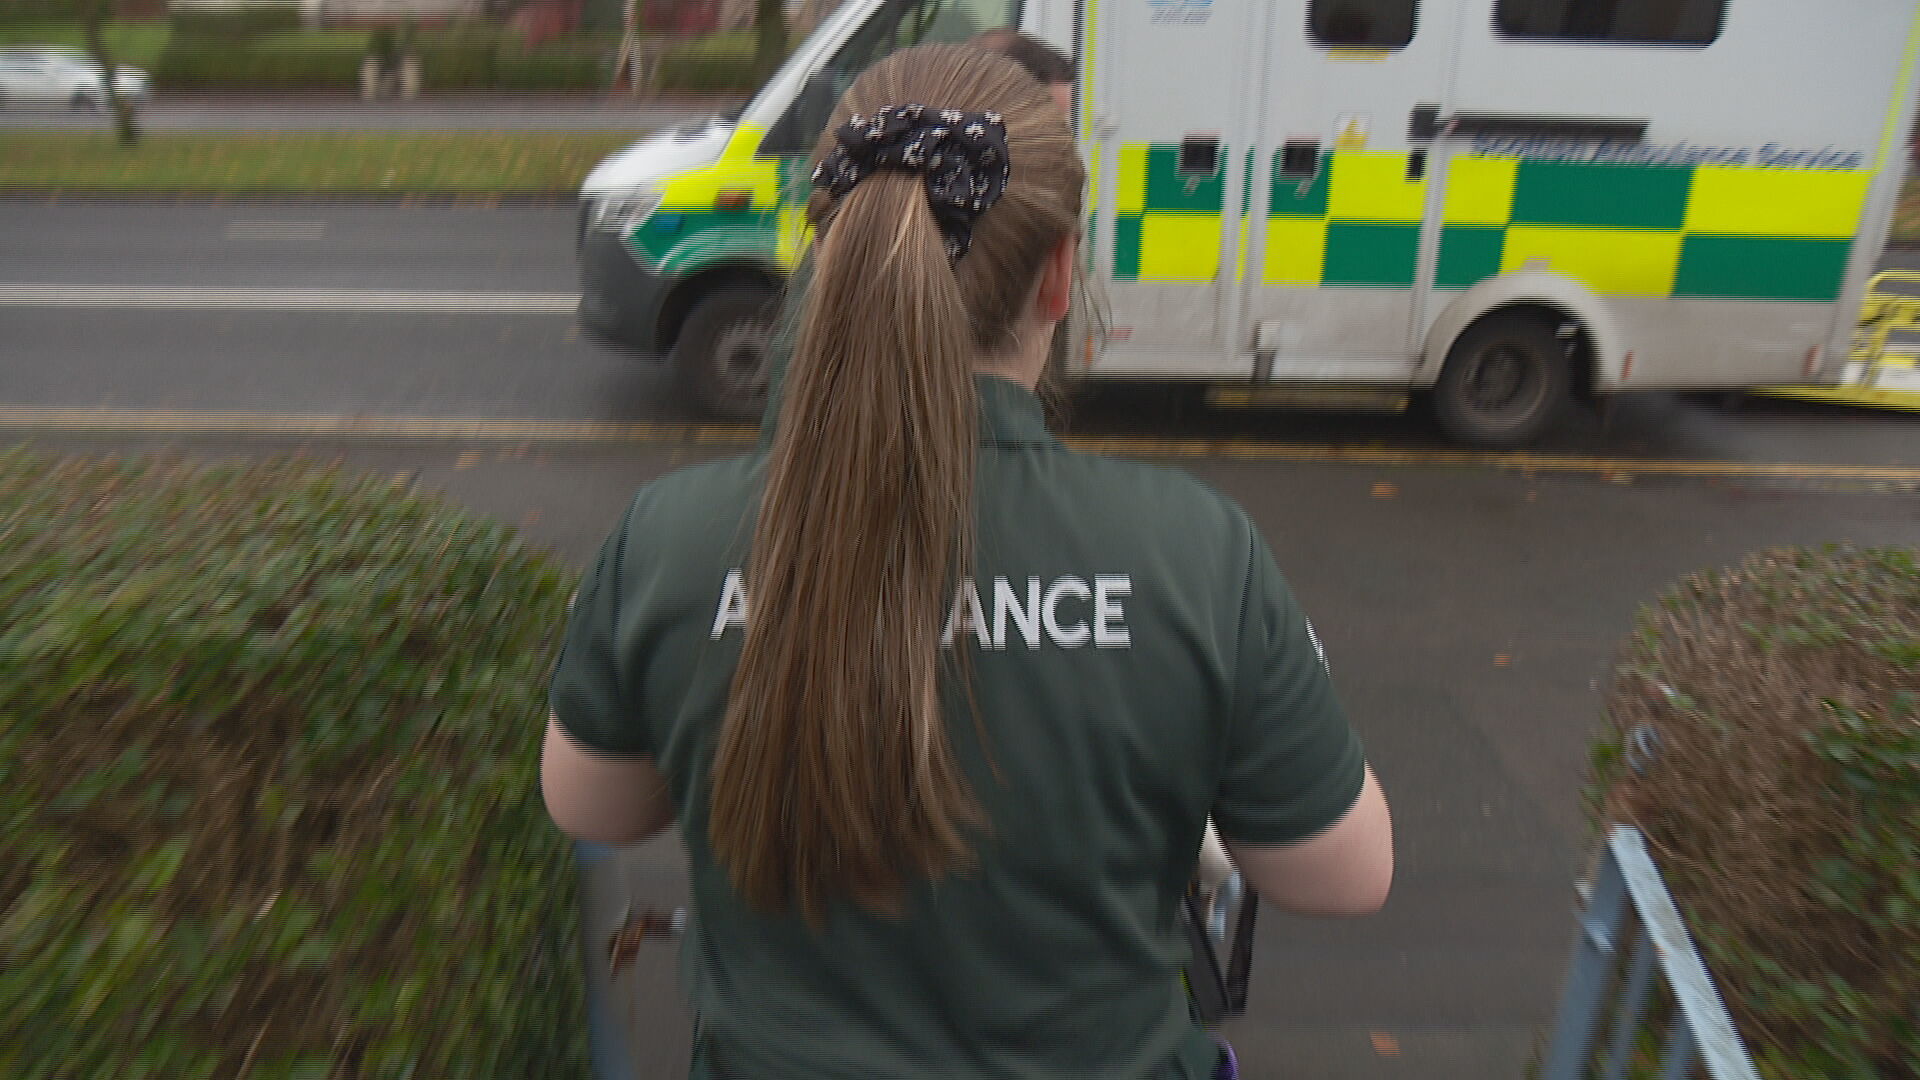 The government is investing £50m to recruit more staff for the Scottish Ambulance Service